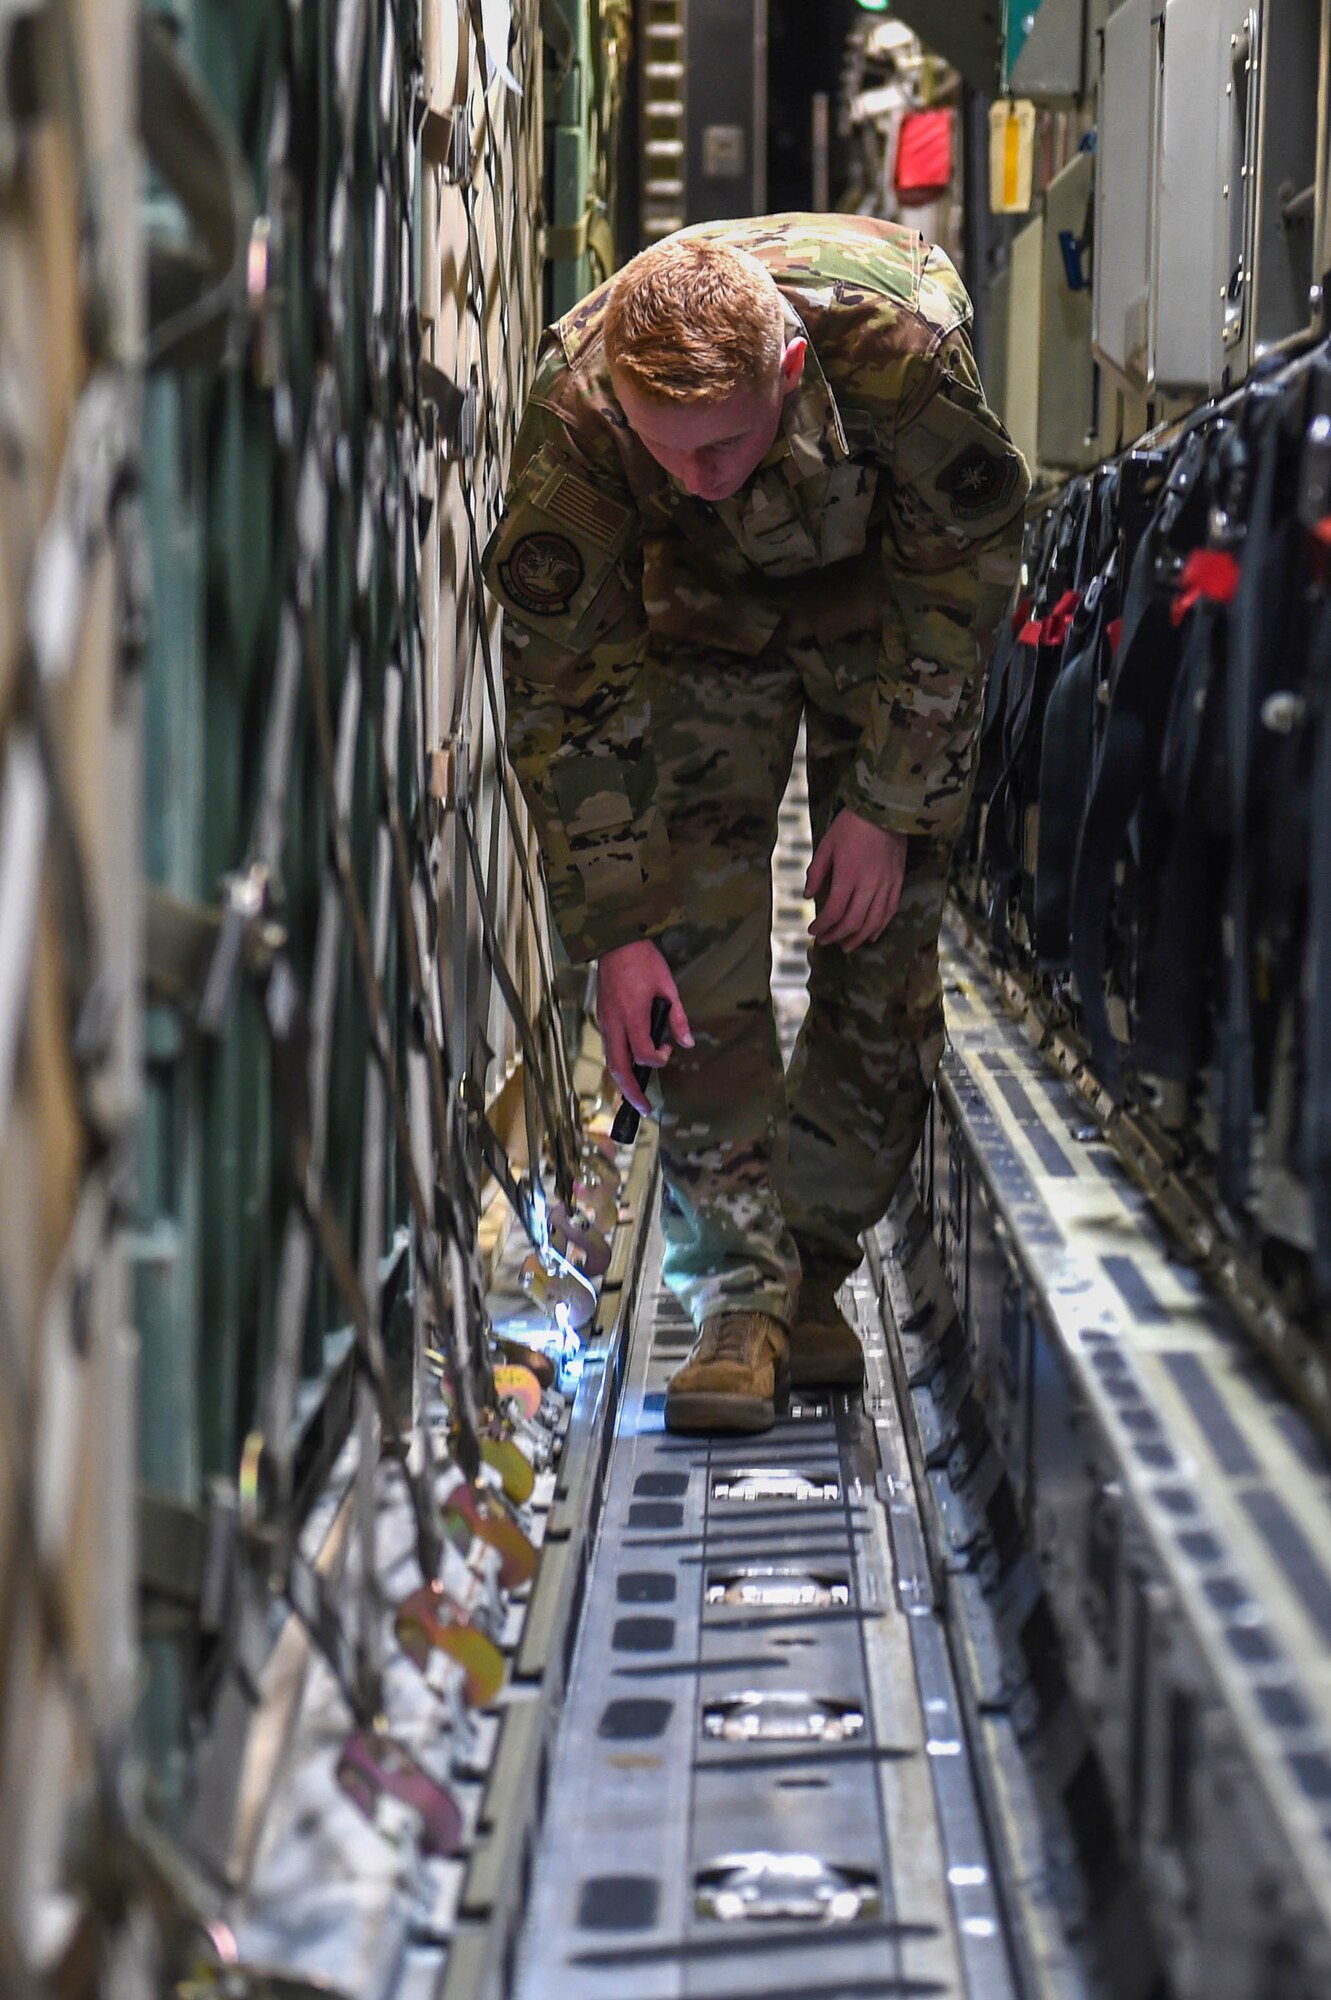 Airman 1st Class Kam Watt, 4th Airlift Squadron loadmaster, double checks the secure netting of pallets of cargo aboard a C-17 Globemaster III as part of the pre-flight checklist before taking off from Spangdahlem Air Base, Germany, Dec. 18, 2019. Loadmasters are responsible for ensuring the security of cargo and proper weight distribution. (U.S. Air Force photo by Airman 1st Class Mikayla Heineck)